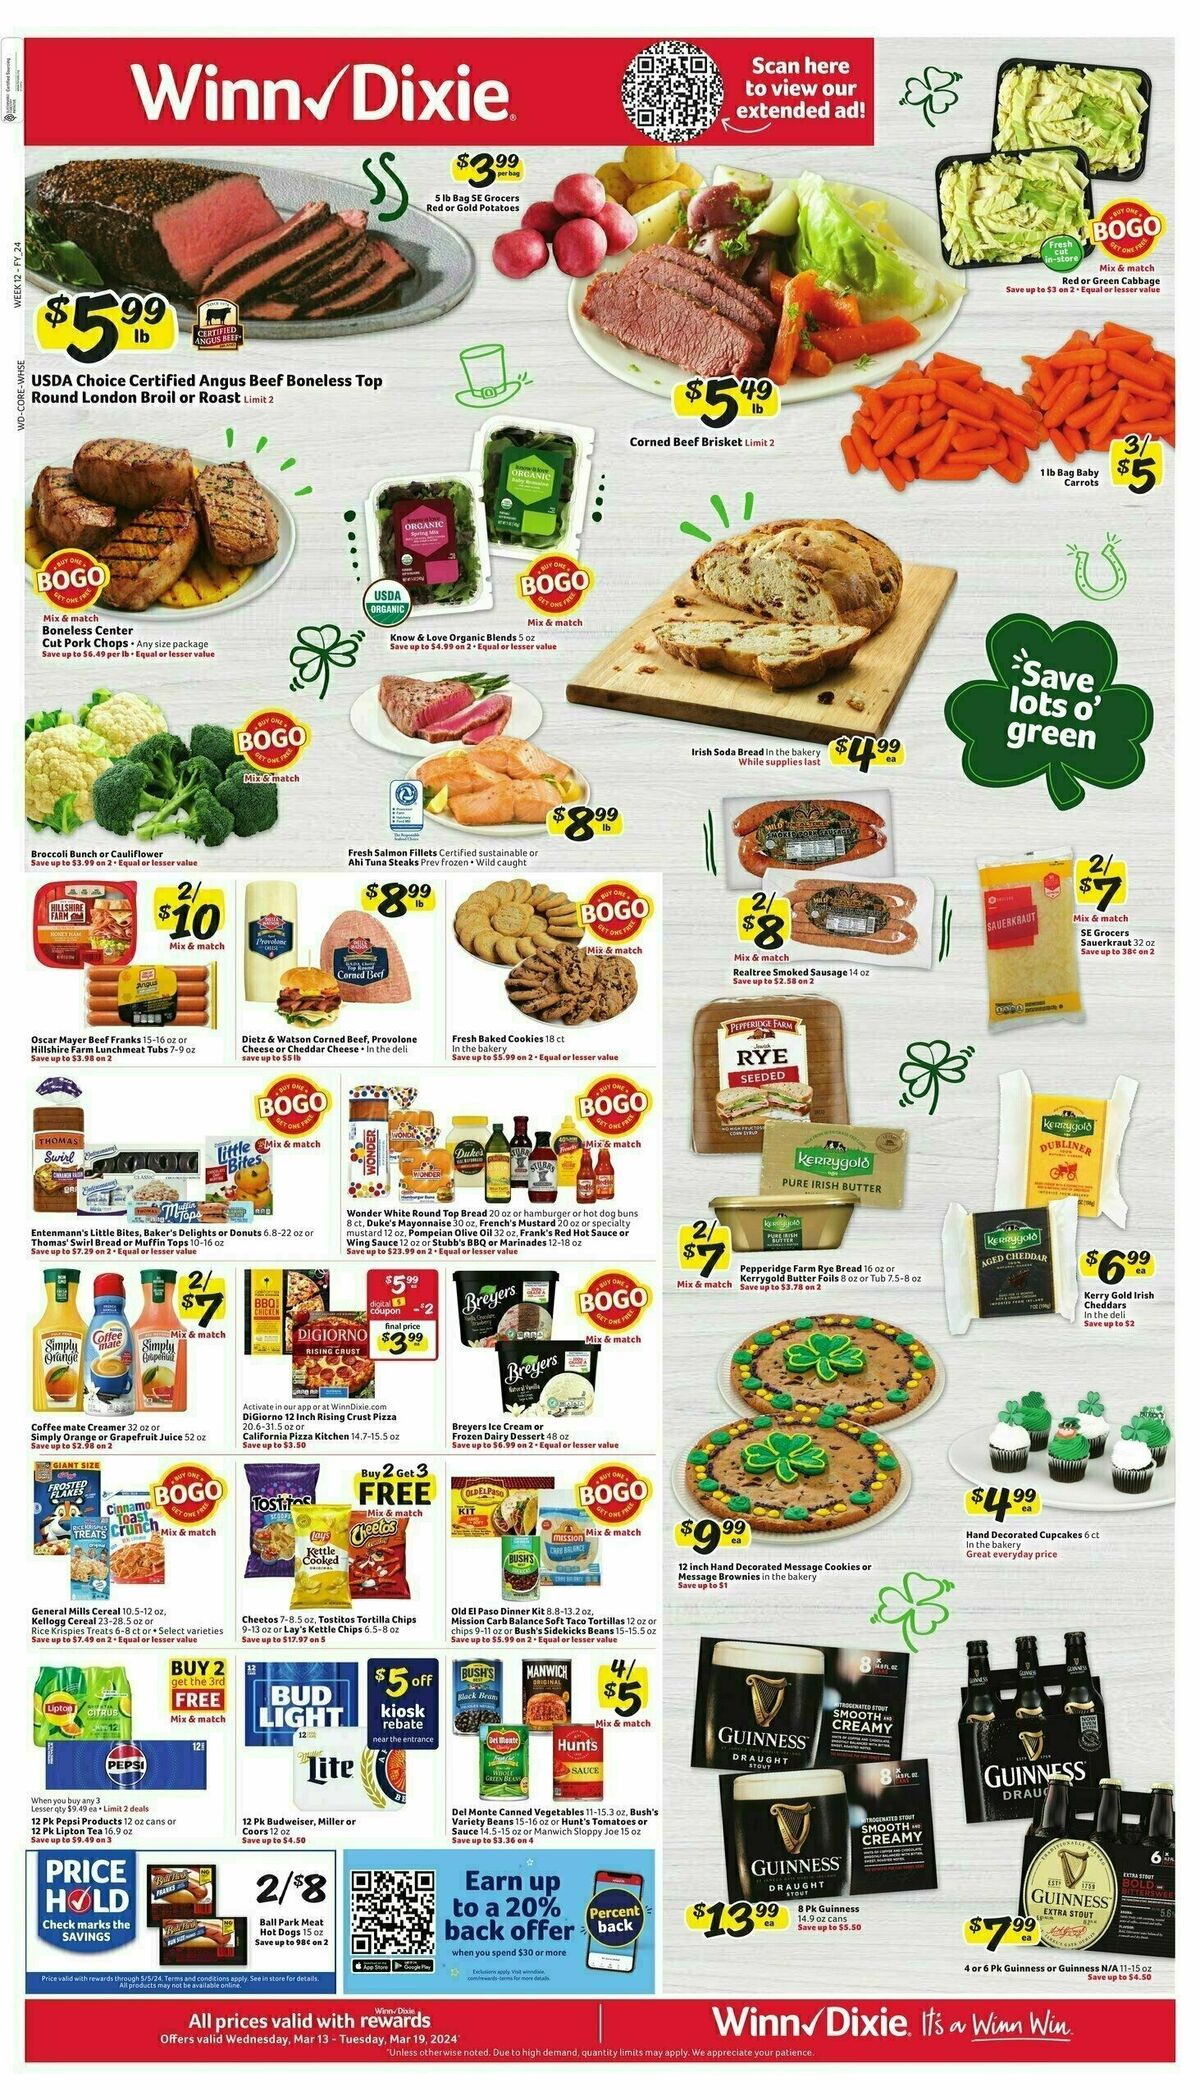 Winn-Dixie Weekly Ad from March 13